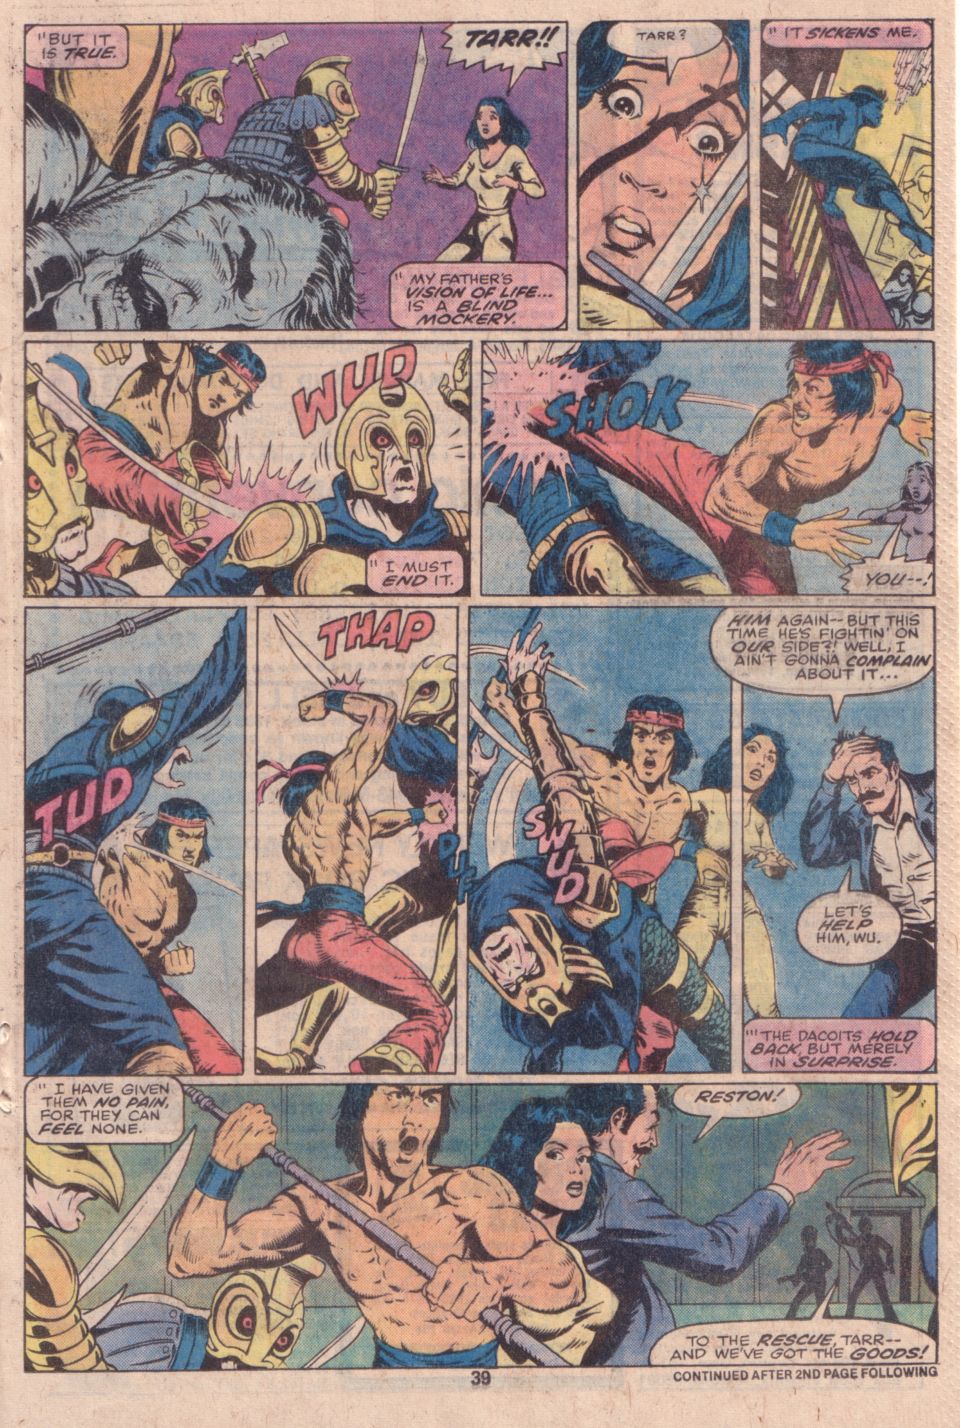 What If? (1977) issue 16 - Shang Chi Master of Kung Fu fought on The side of Fu Manchu - Page 31